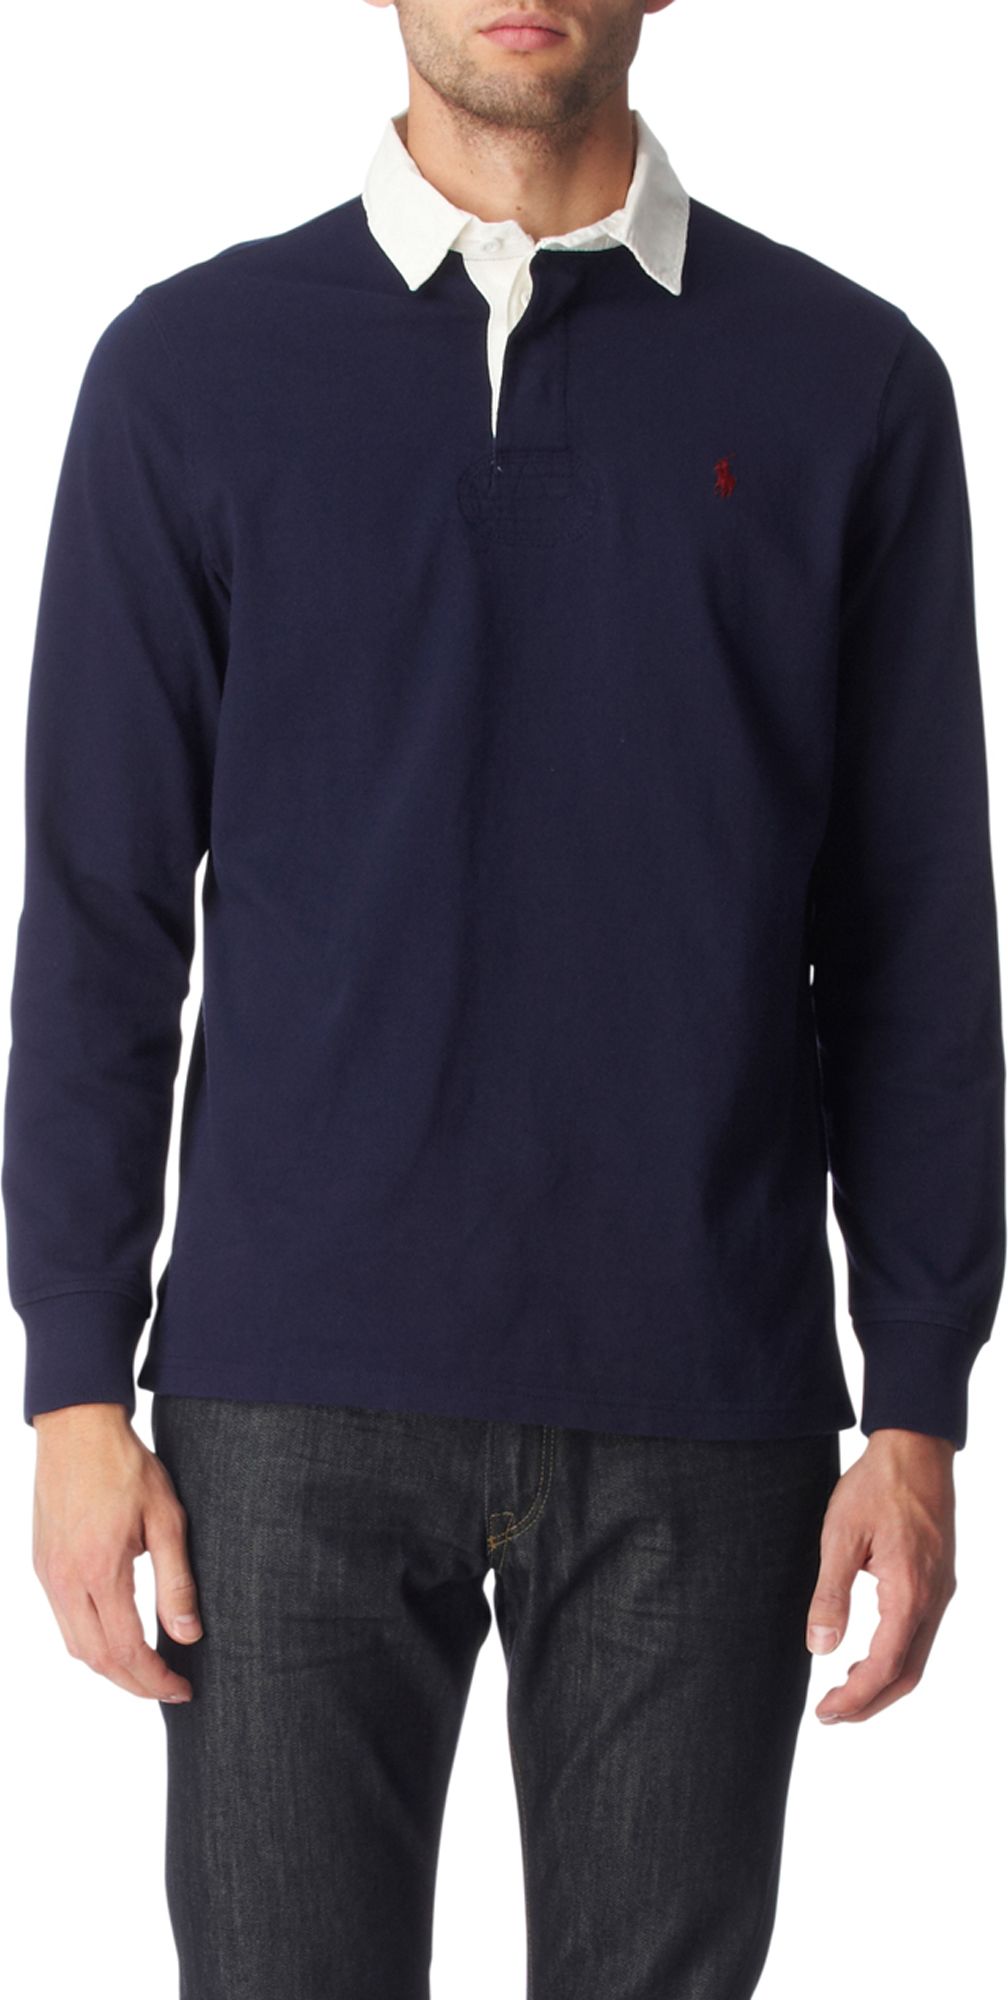 Lyst - Ralph Lauren Customfit Solid Rugby Shirt in Blue ...